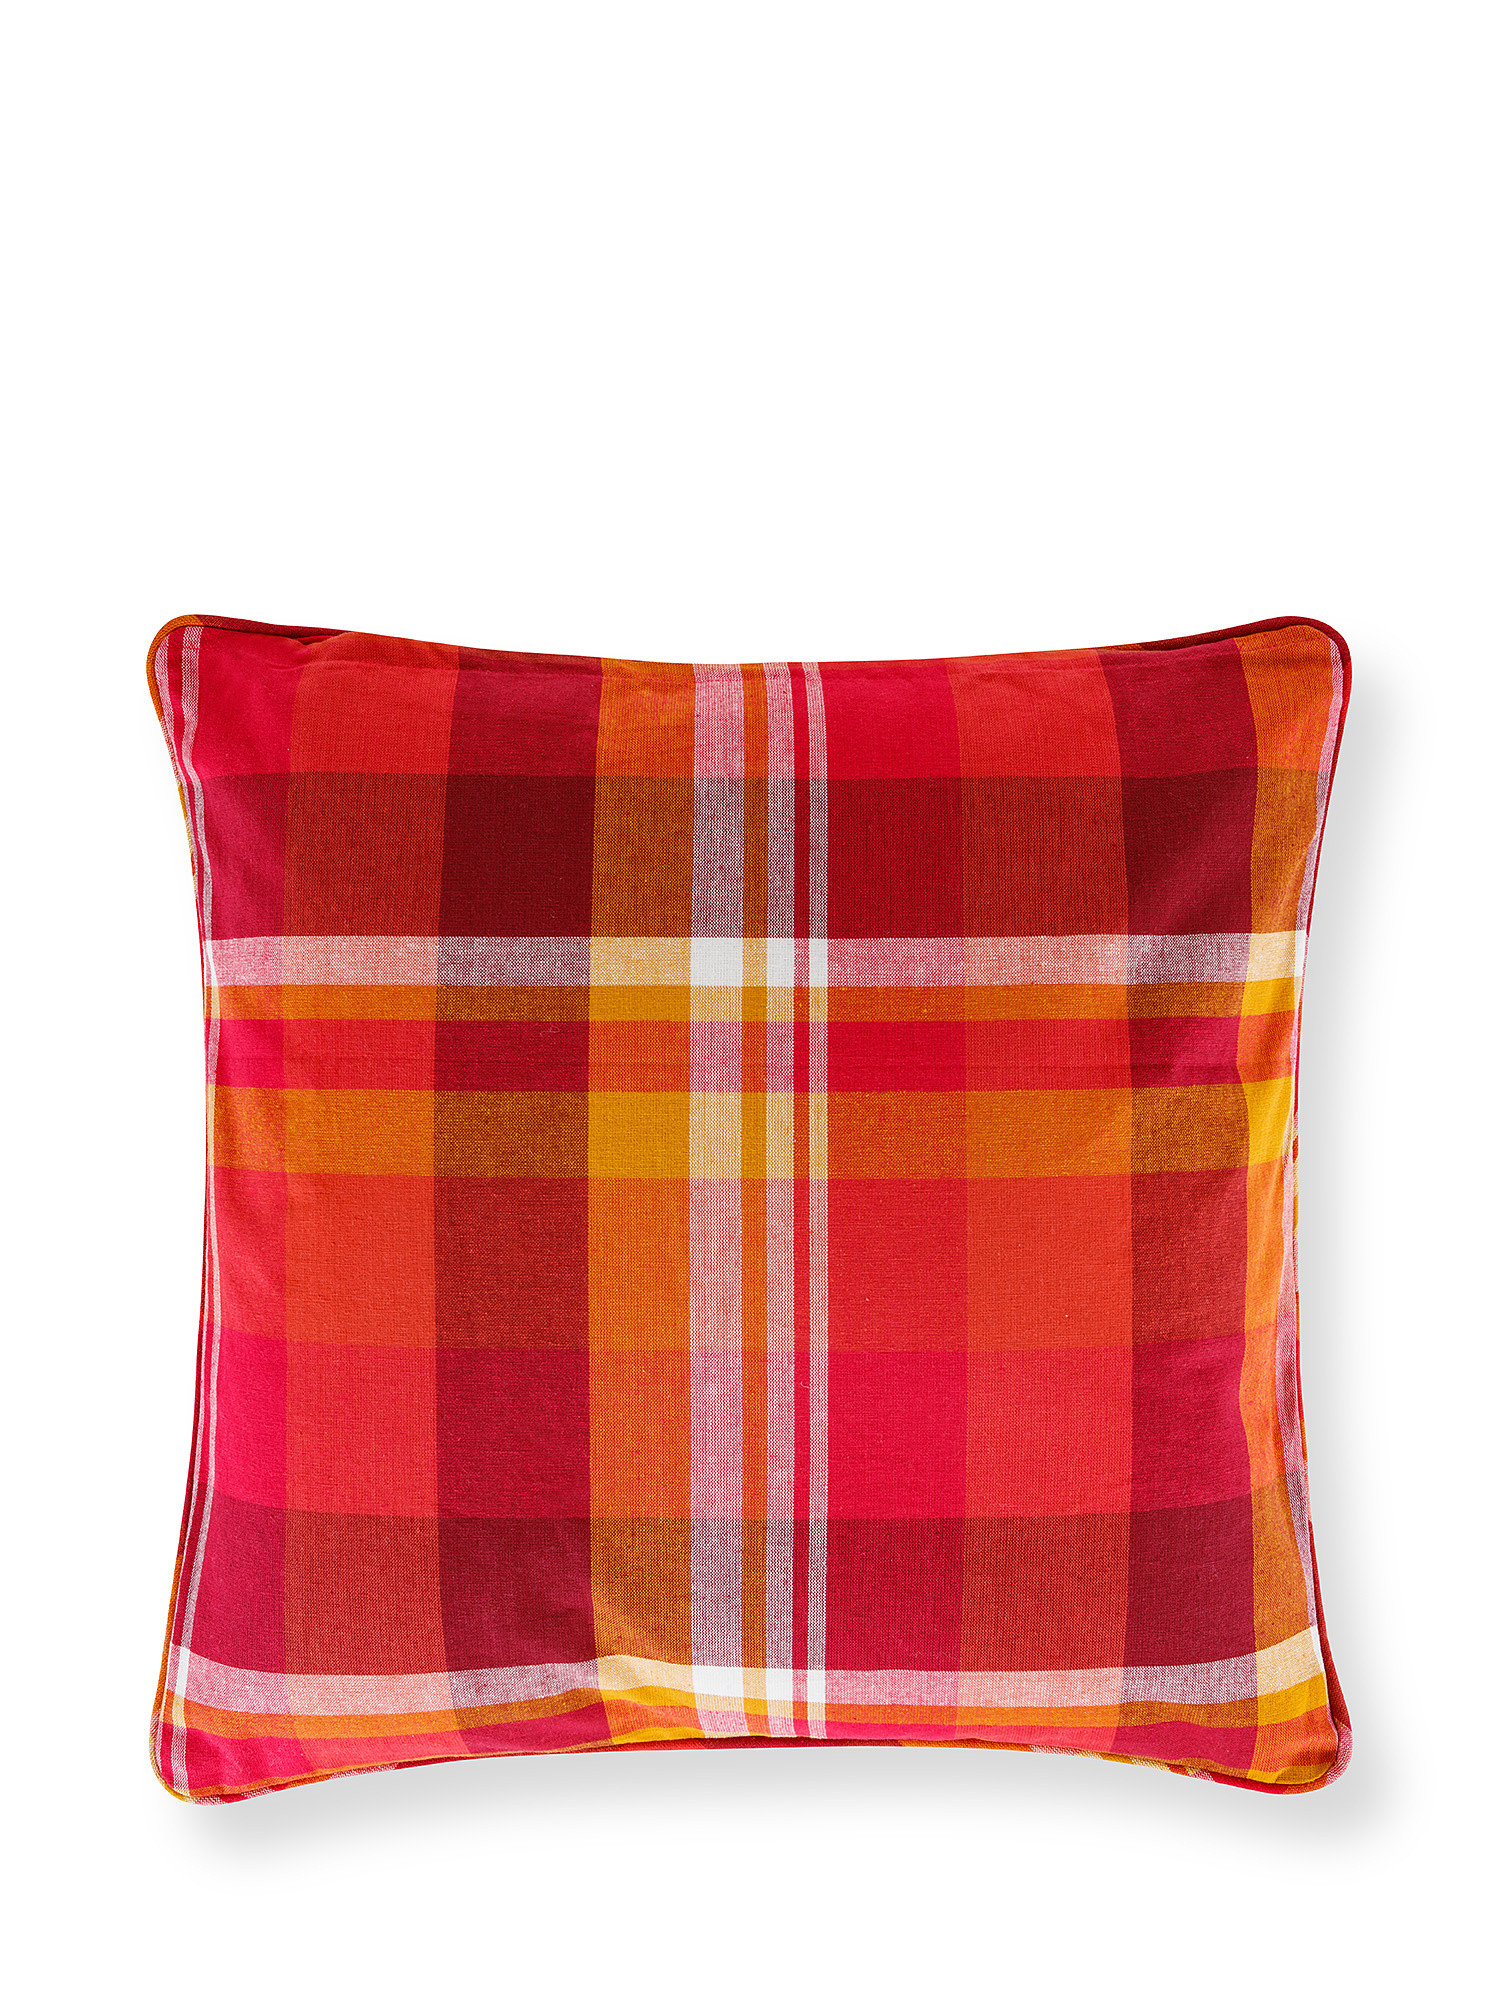 Cuscino cotone motivo check 45x45cm, Rosso, large image number 1